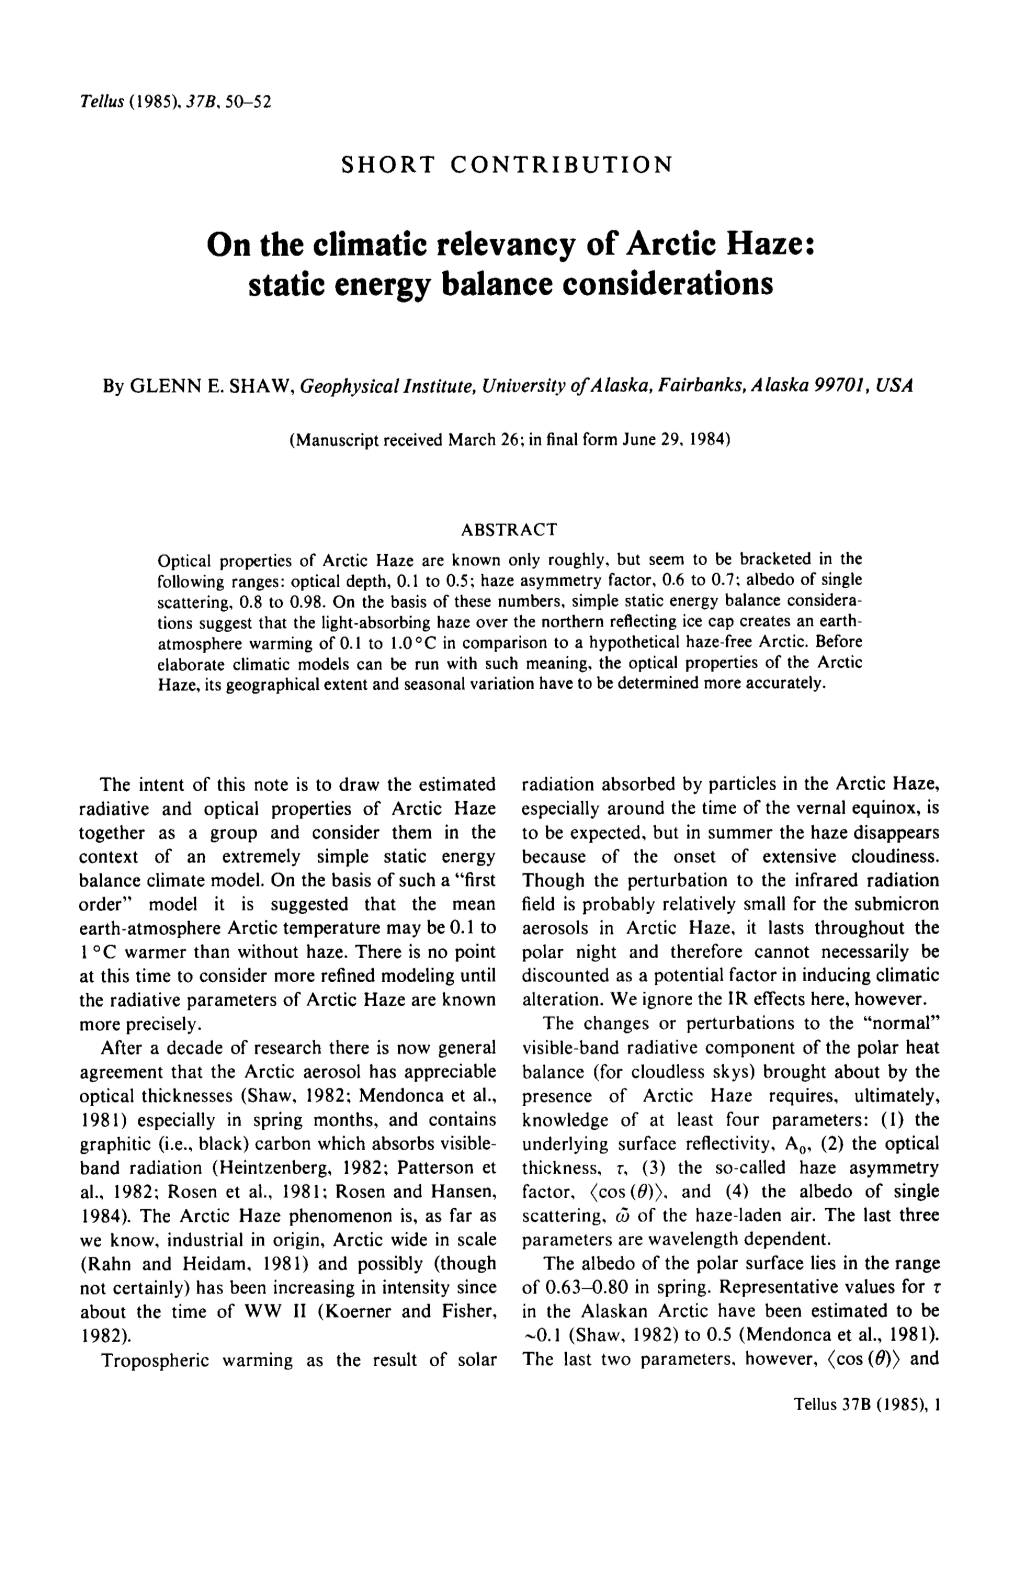 On the Climatic Relevancy of Arctic Haze: Static Energy Balance Considerations